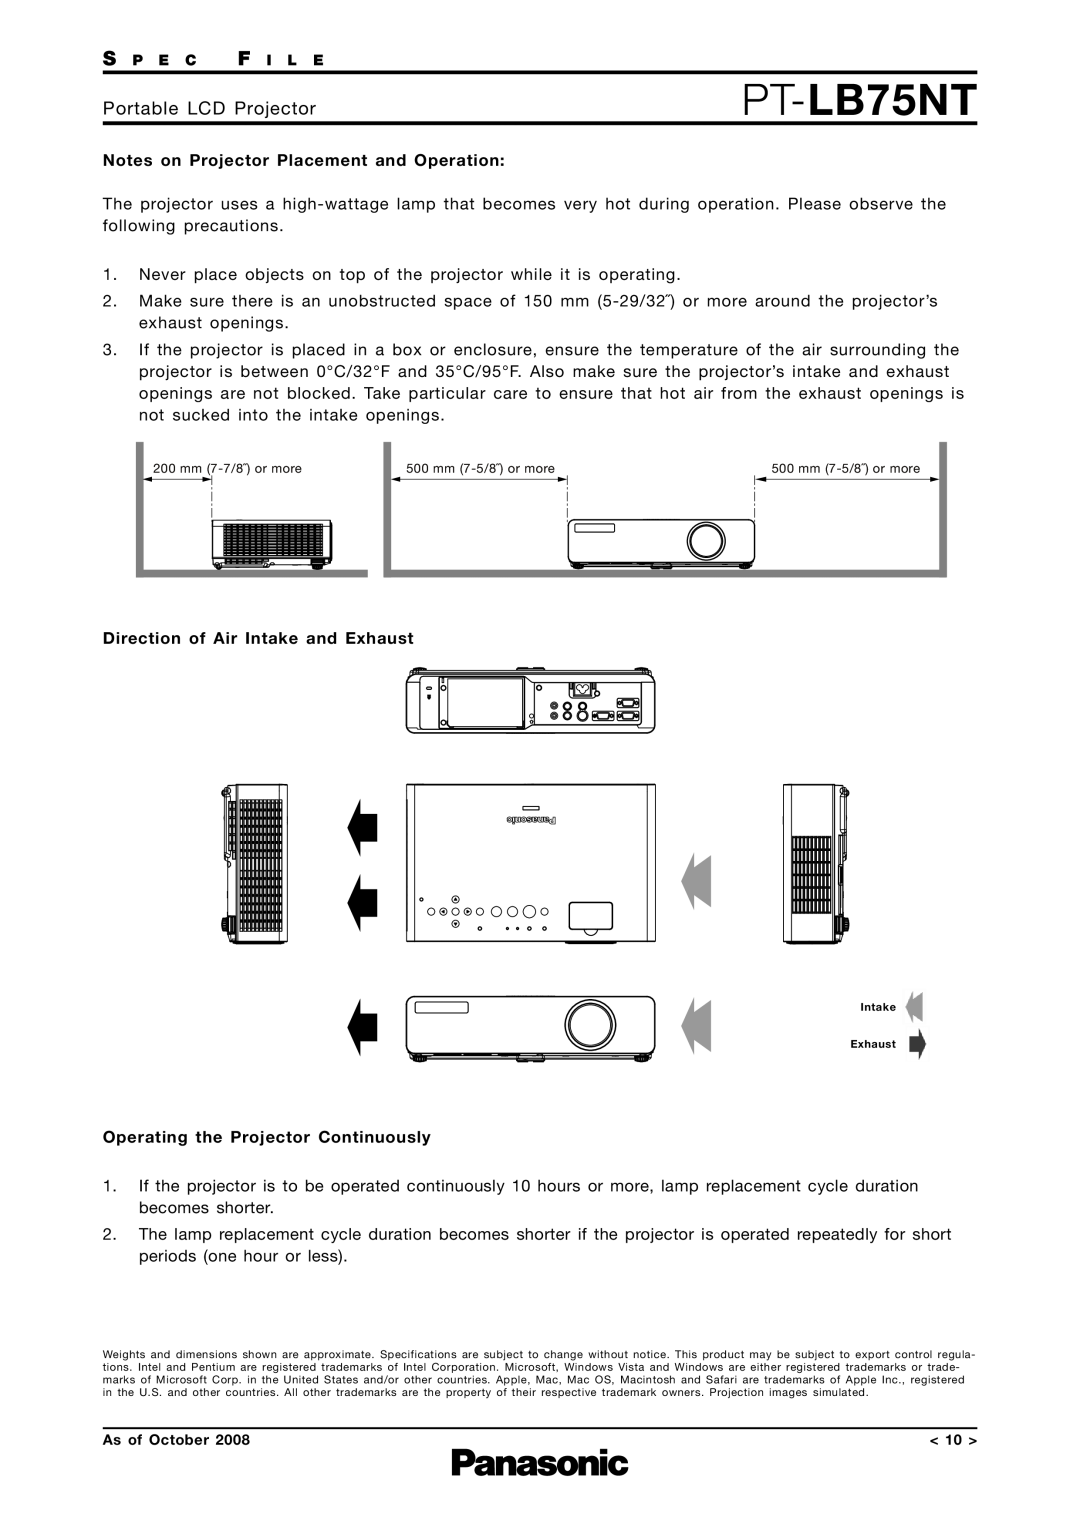 Panasonic PT-LB75NT specifications Notes on Projector Placement and Operation, Direction of Air Intake and Exhaust 